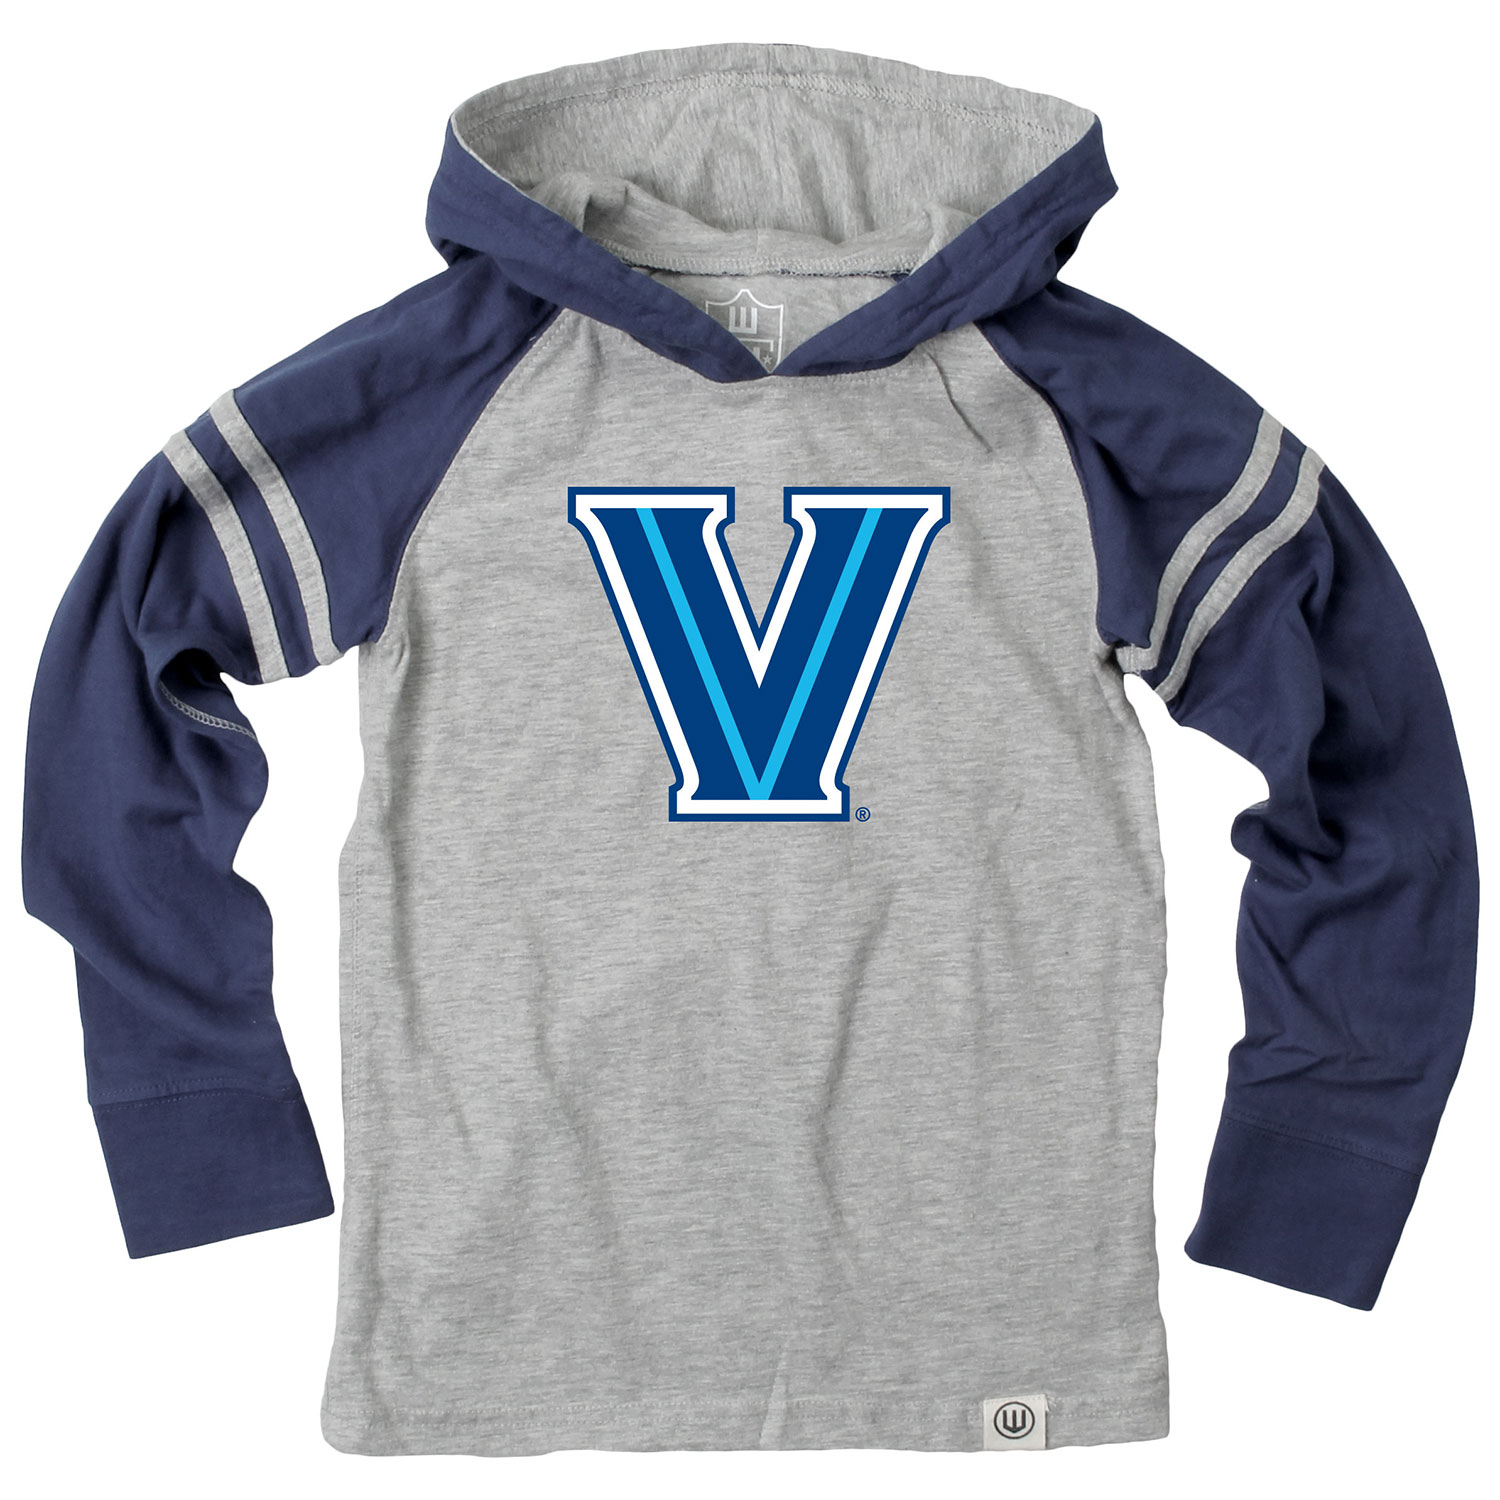 Wes And Willy Villanova Wildcats Youth Boys Long Sleeve Striped Hooded T-Shirt